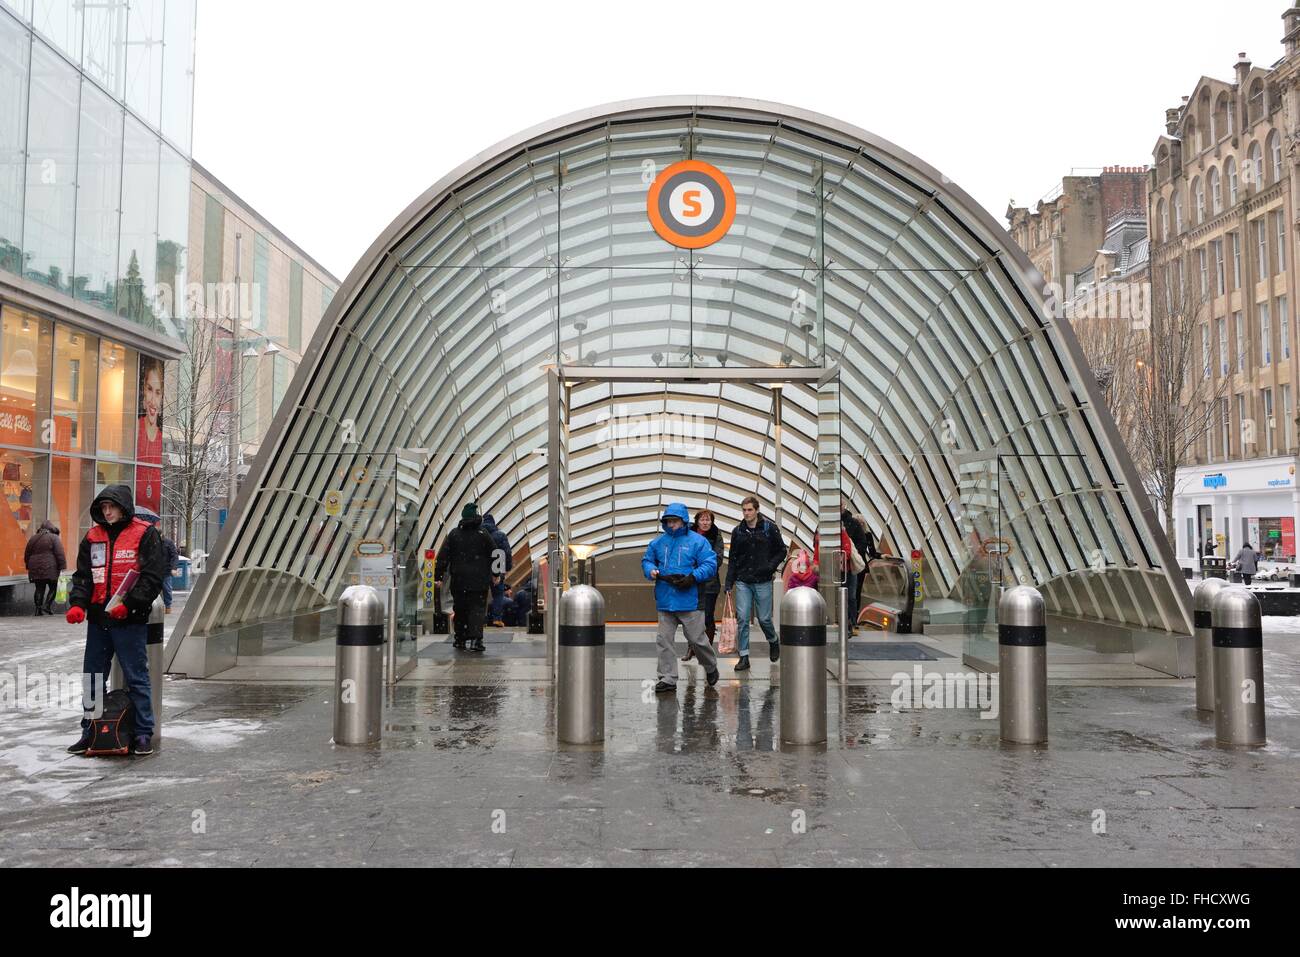 Newly constructed glass domed entrance to Glasgow's subway in St Enoch square. Stock Photo